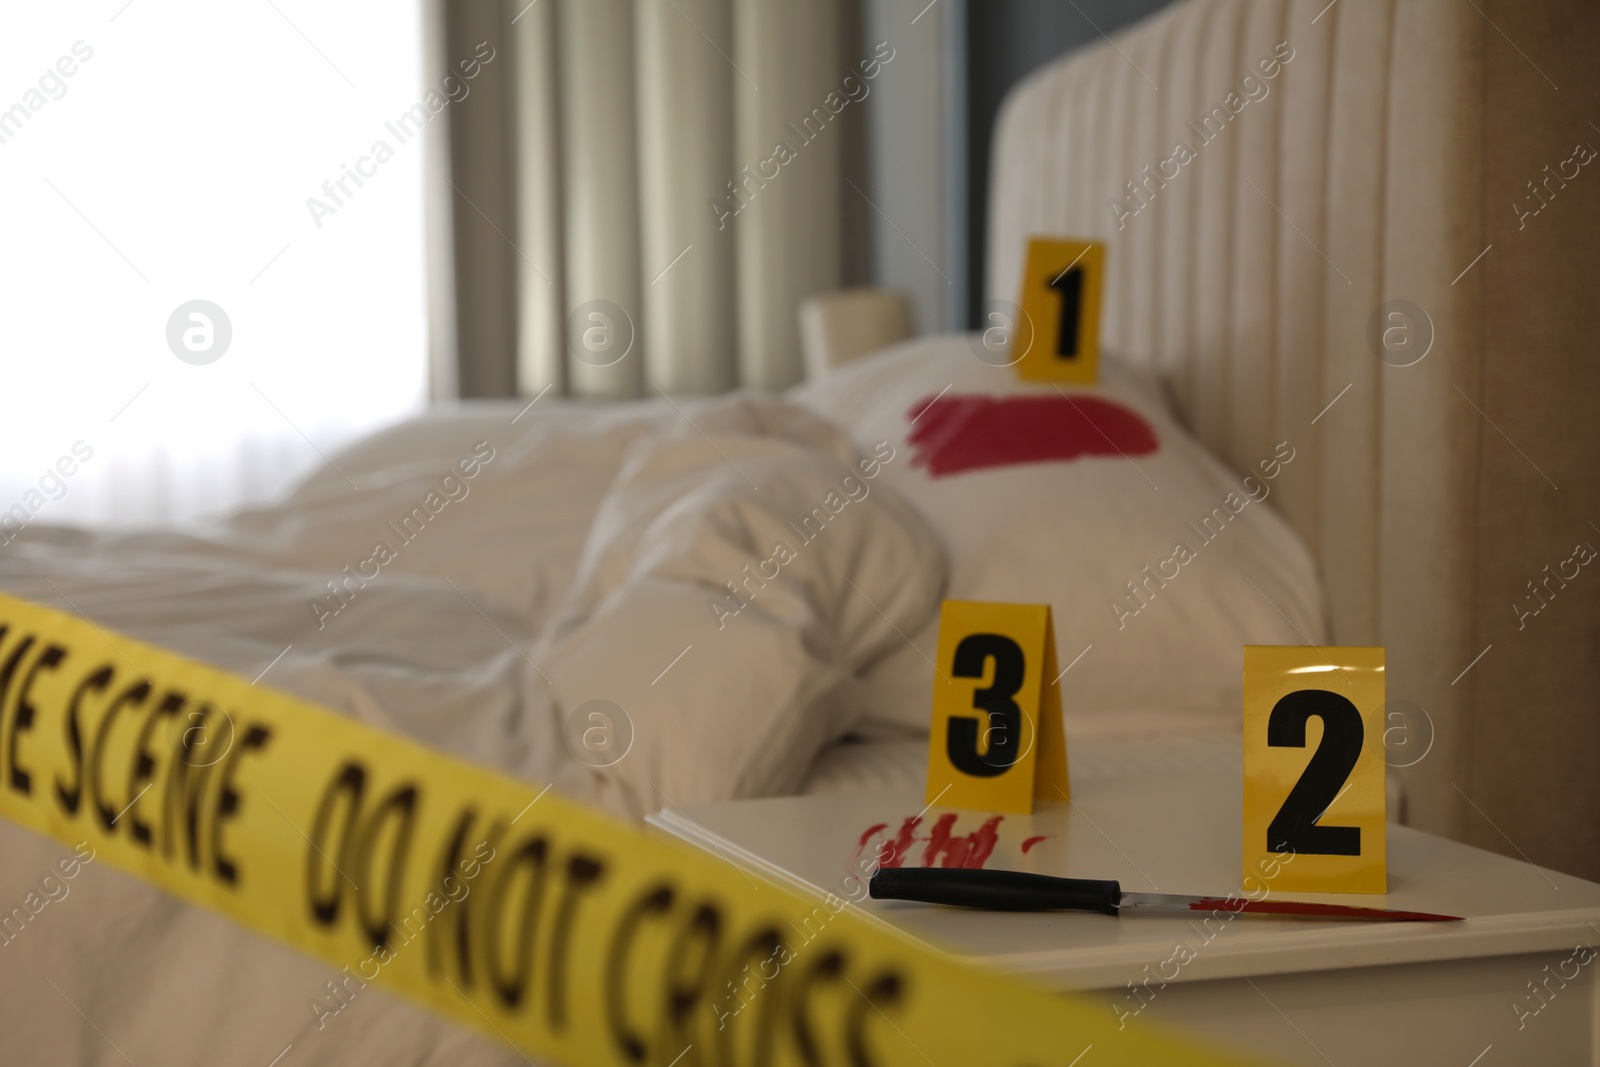 Photo of Bloody knife and crime scene markers on nightstand in bedroom